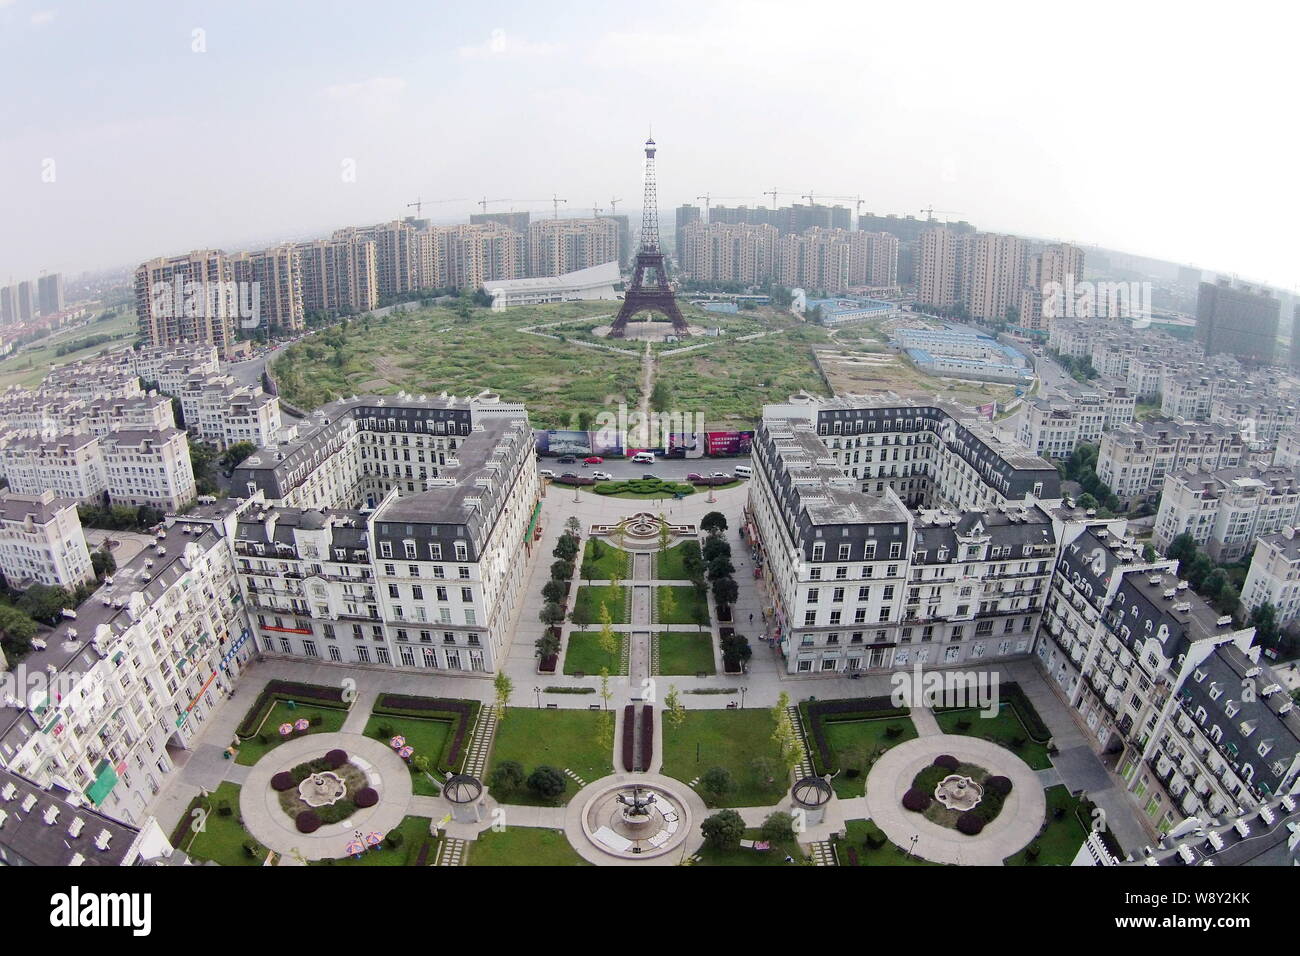 The downsized replication of Eiffel Tower is surrounded by vegetable fields and residential apartment buildings in Tianducheng, a small Chinese commun Stock Photo